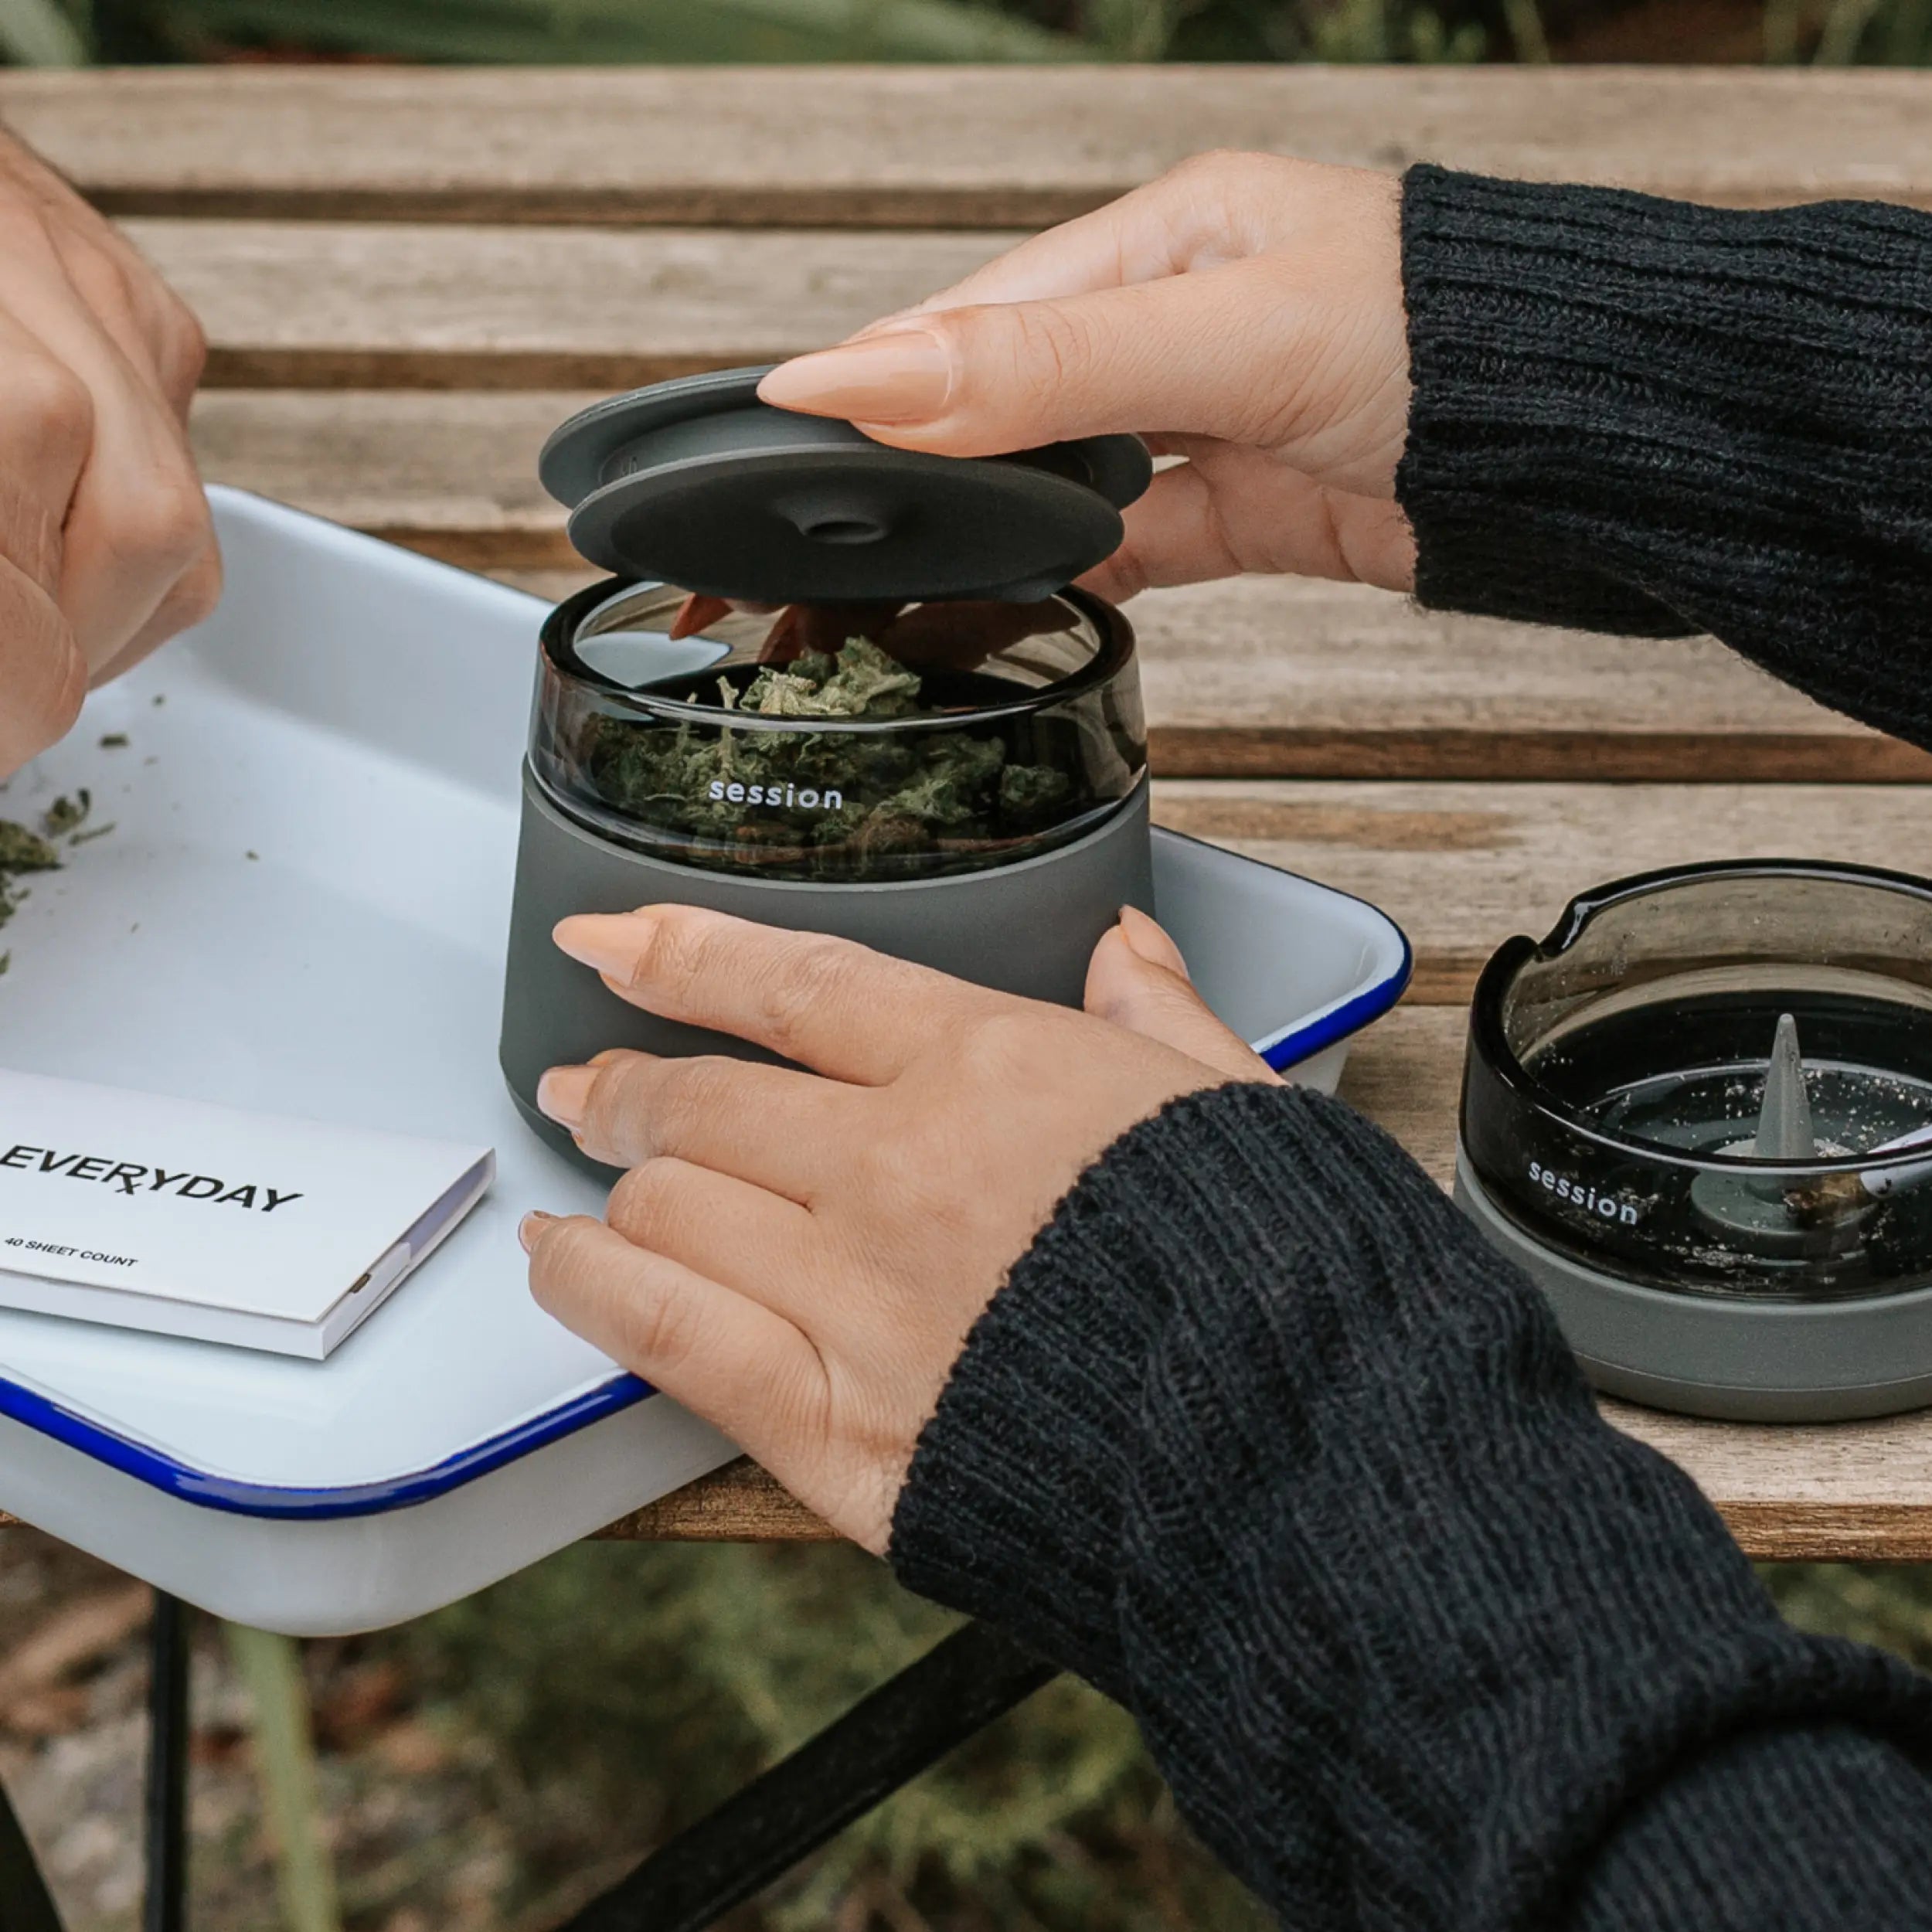 Approachable Stash Jar – Session Goods brings you a user-friendly and chic storage solution, making organization effortlessly stylish and accessible.